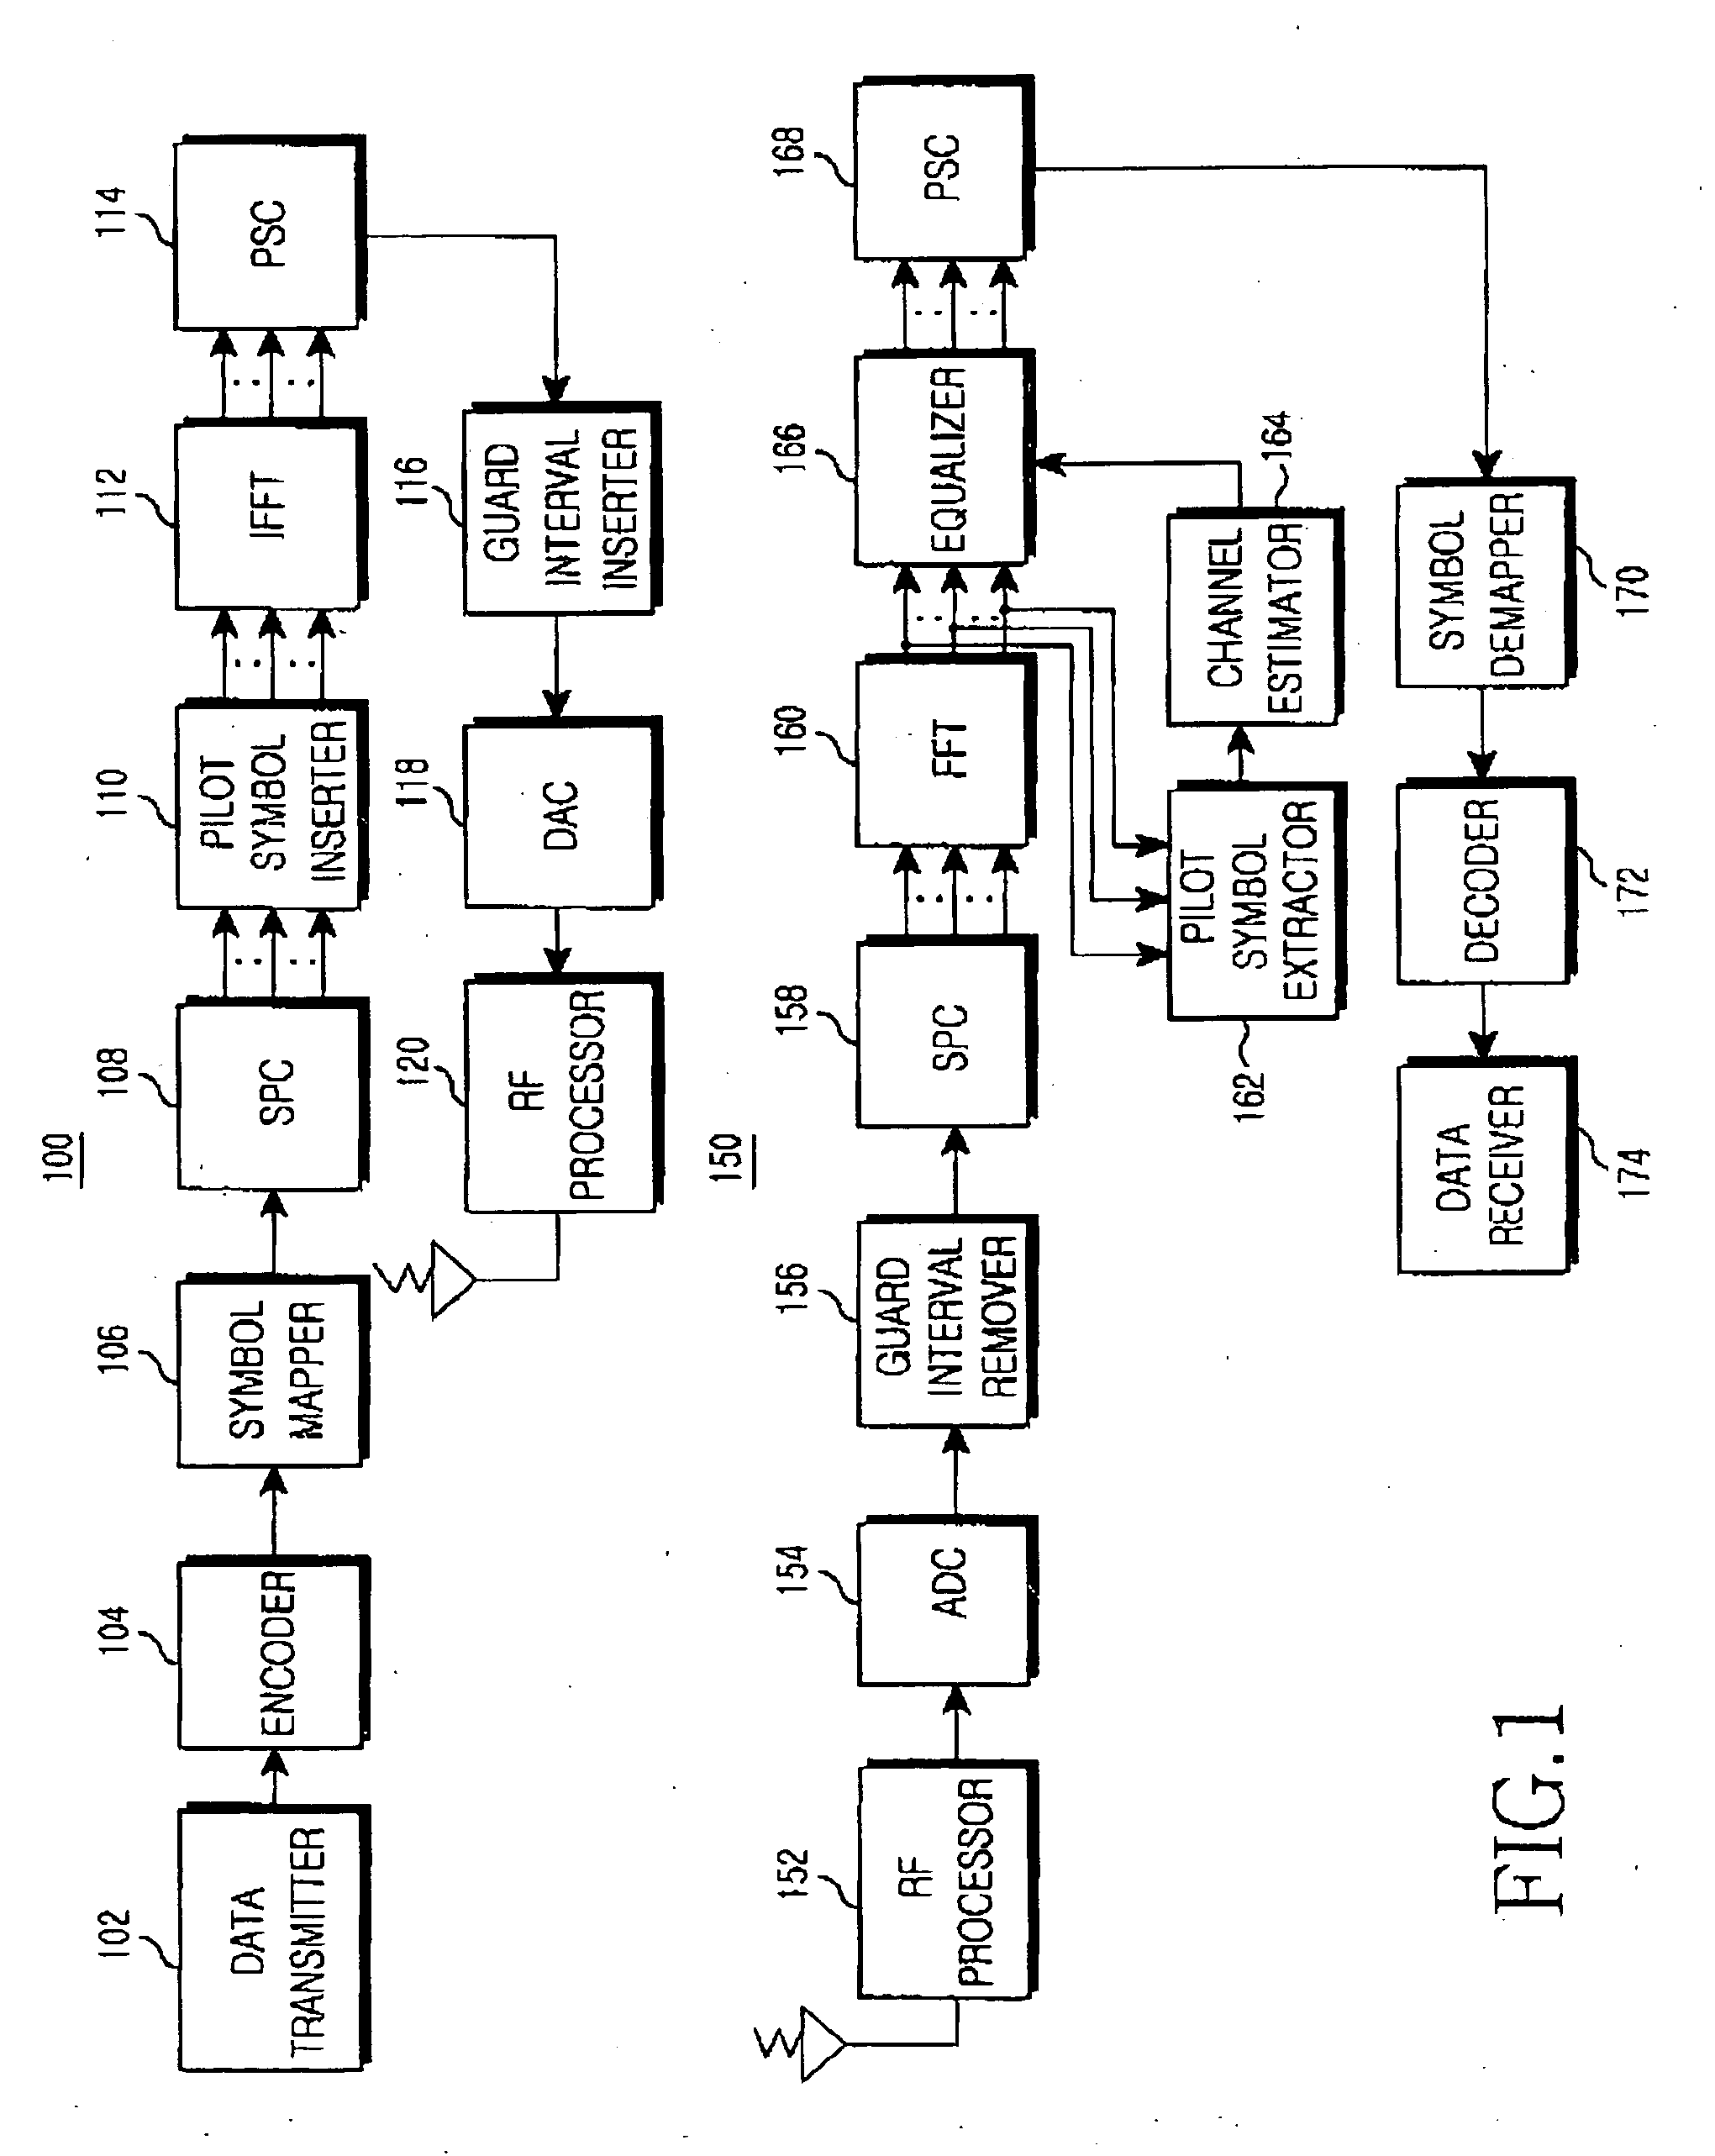 Apparatus and method for PAPR reduction in an OFDM communication system